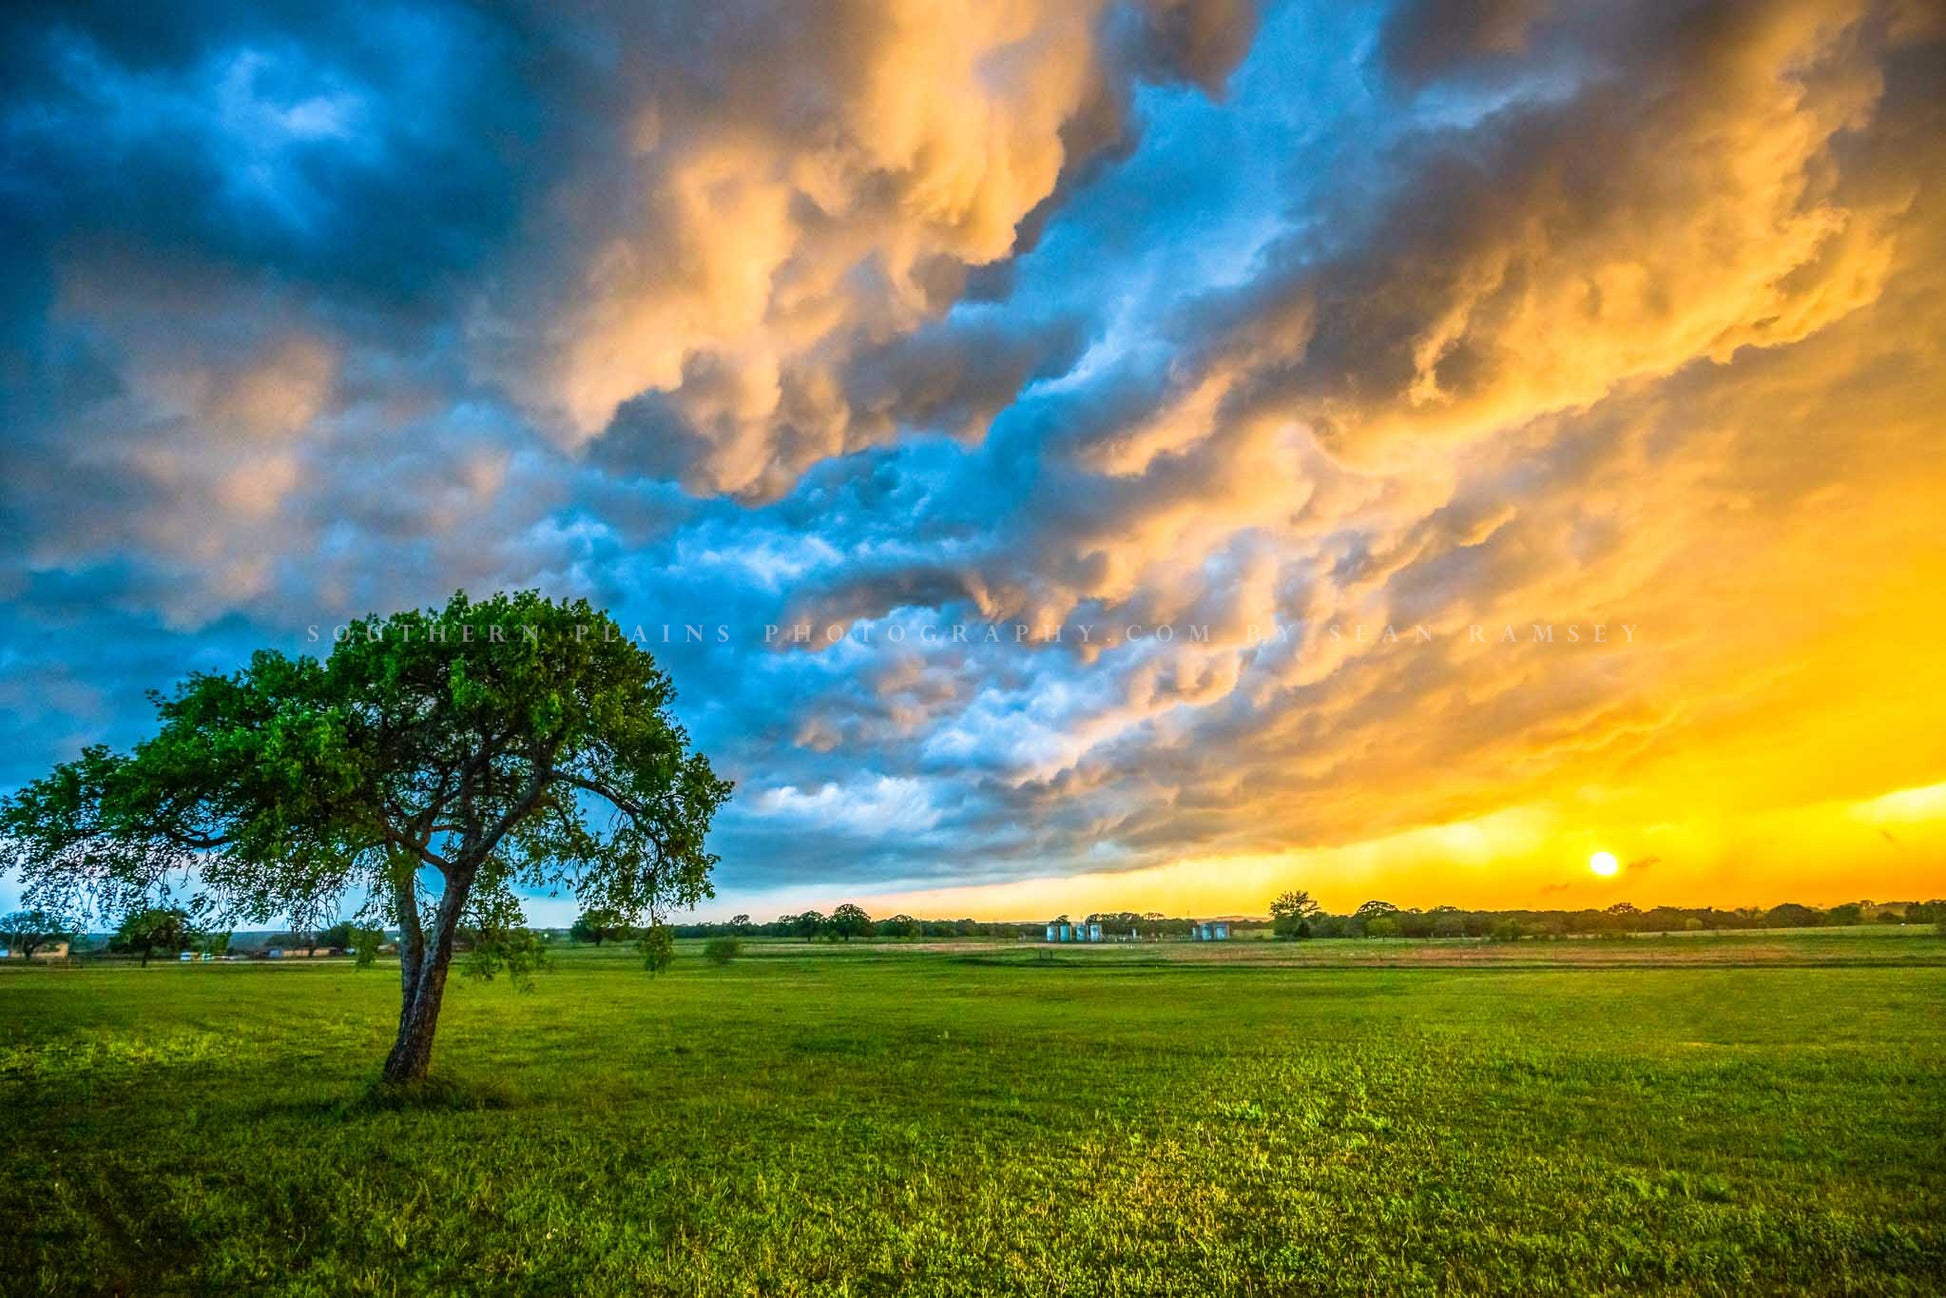 Landscape photography print of storm clouds over a lone tree at sunset on a stormy spring evening in Texas by Sean Ramsey of Southern Plains Photography.